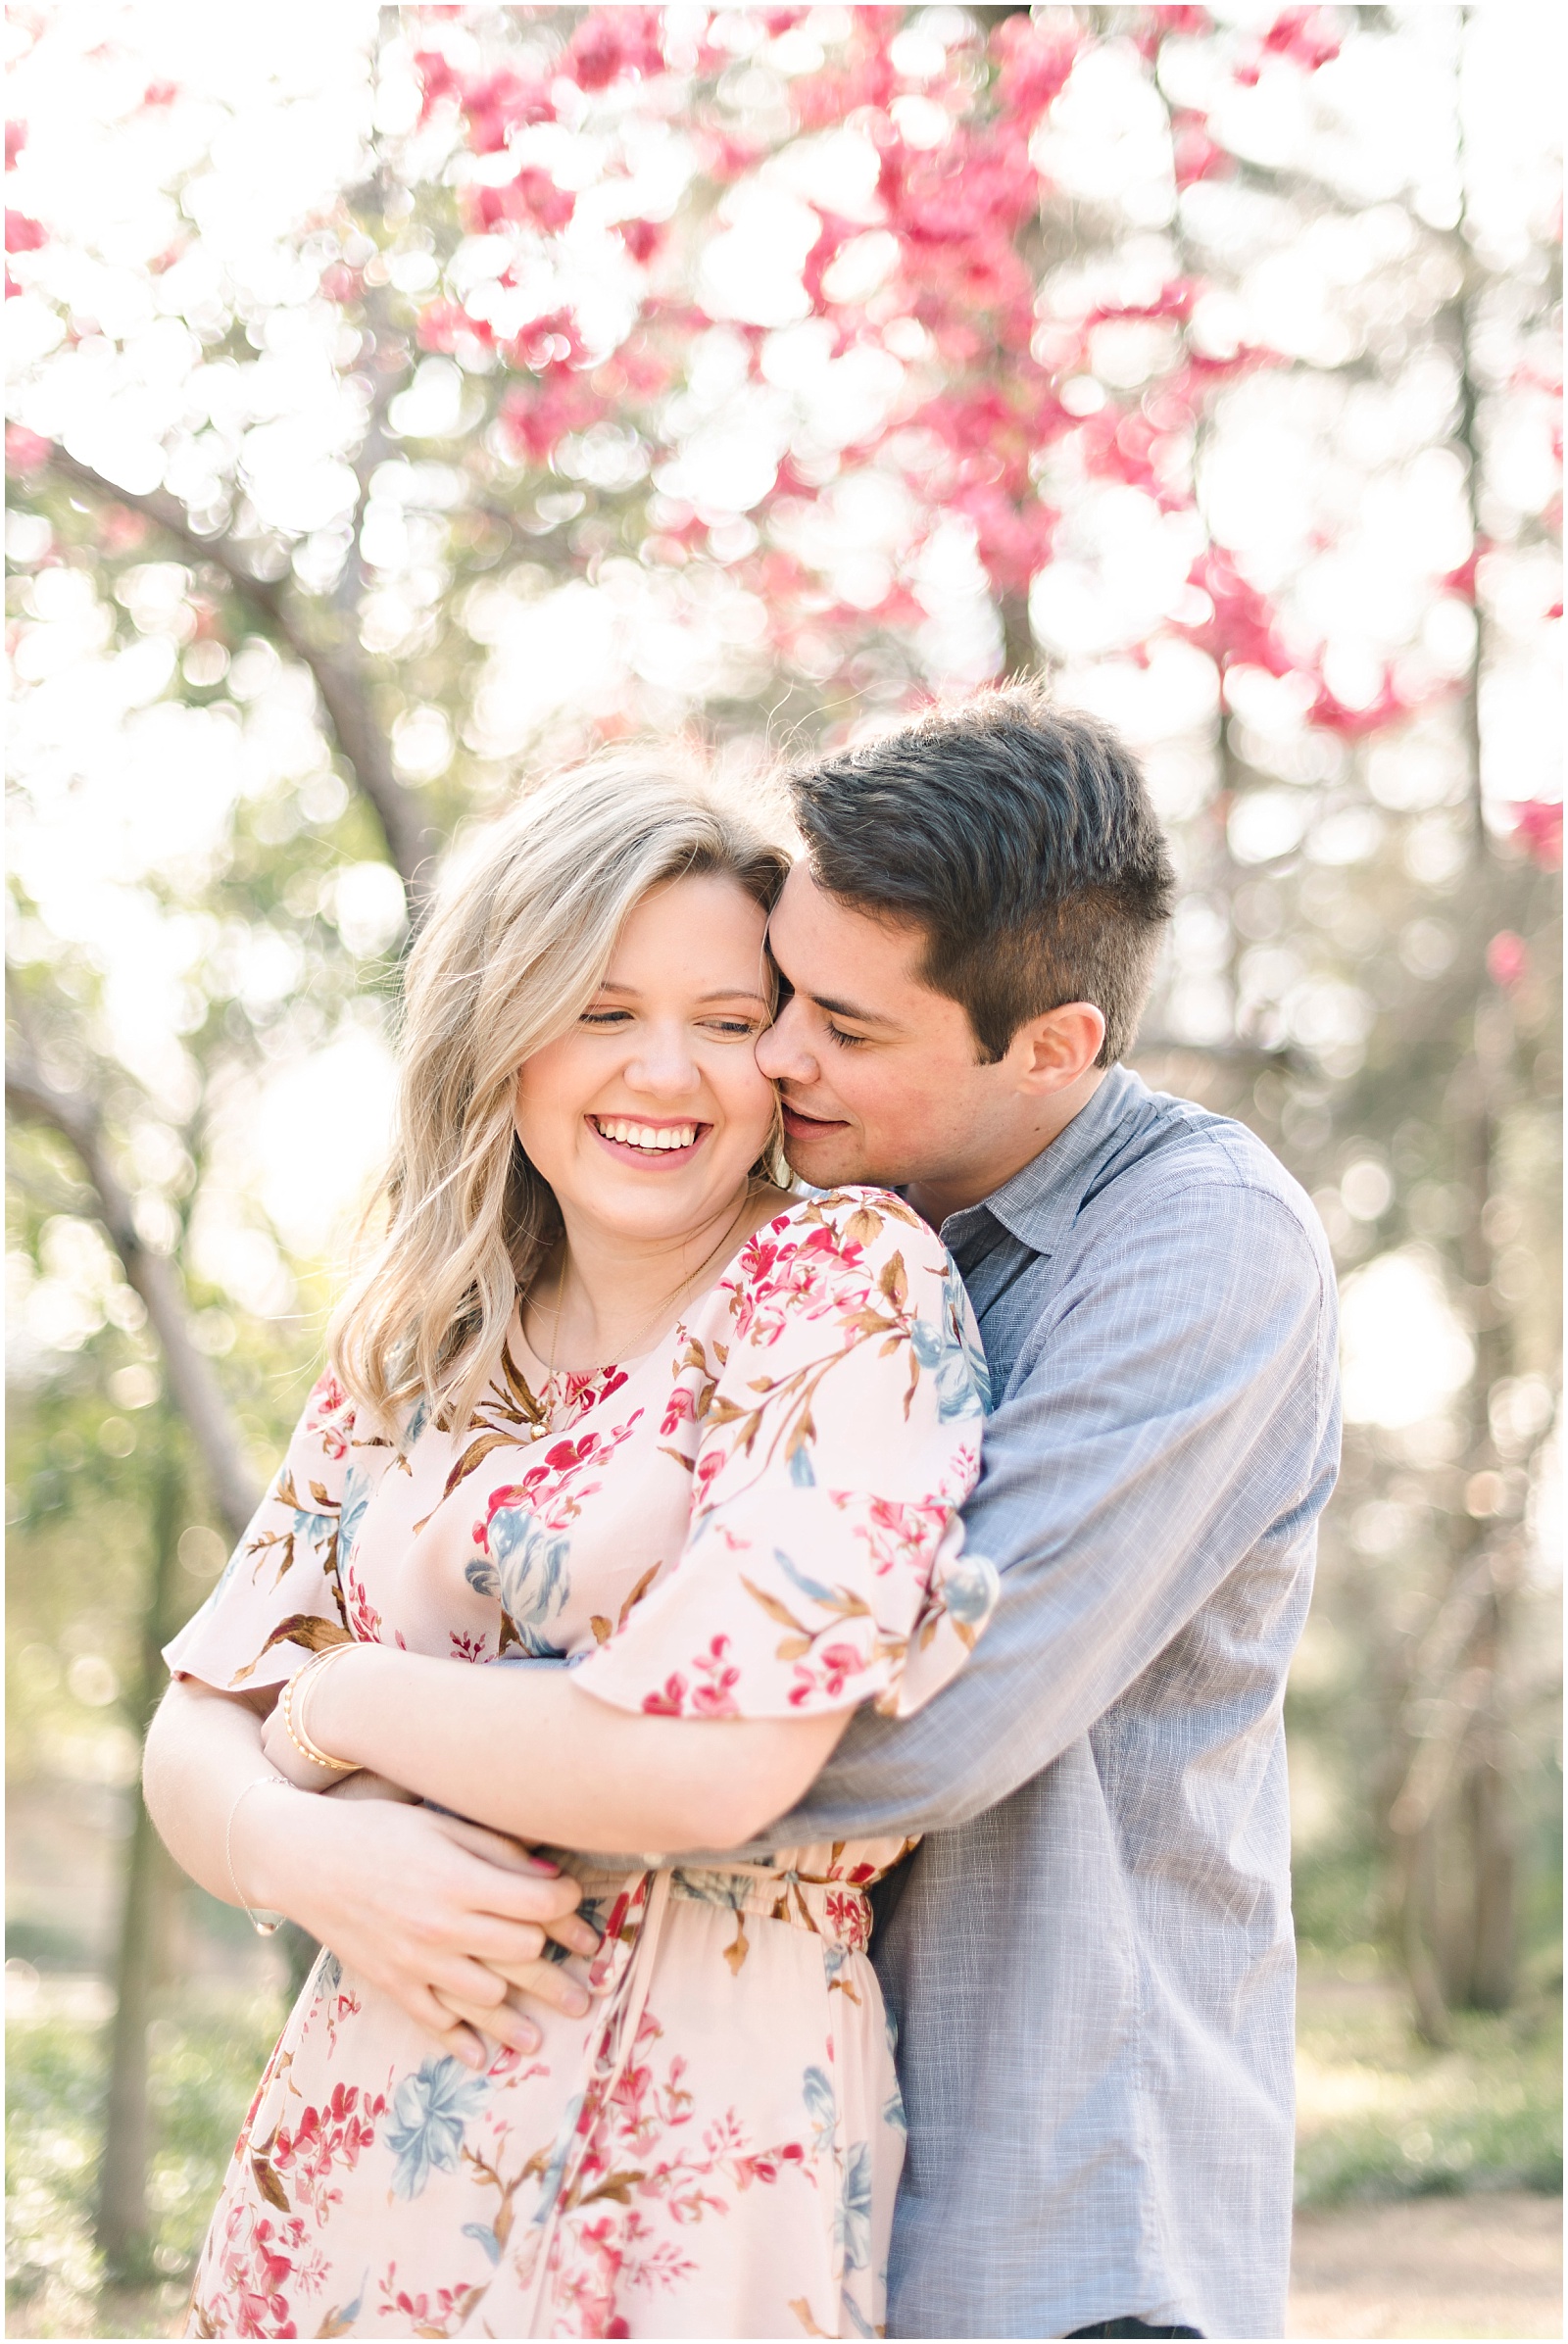 Redlands Engagement Session by Mollie Jane Photography.  To see more go to www.molliejanephotography.com